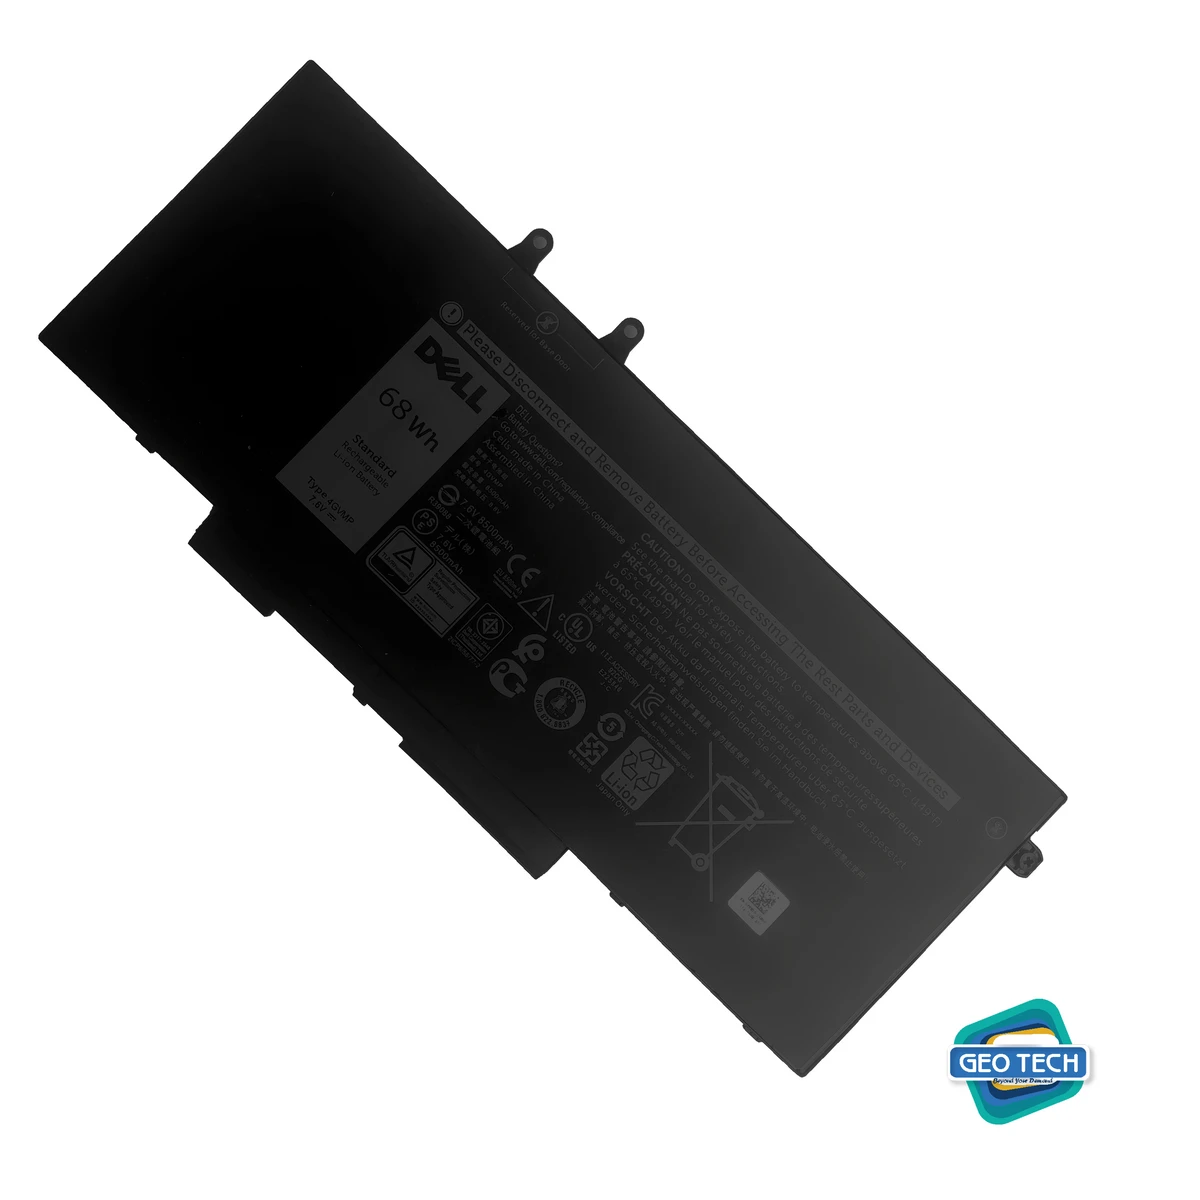 4GVMP Laptop Battery Replacement for Dell Latitude 5400 5410 5500 5510 Precision 3540 3550 Series Notebook 1V1XF R8D7N 9JRYT 09JRYT